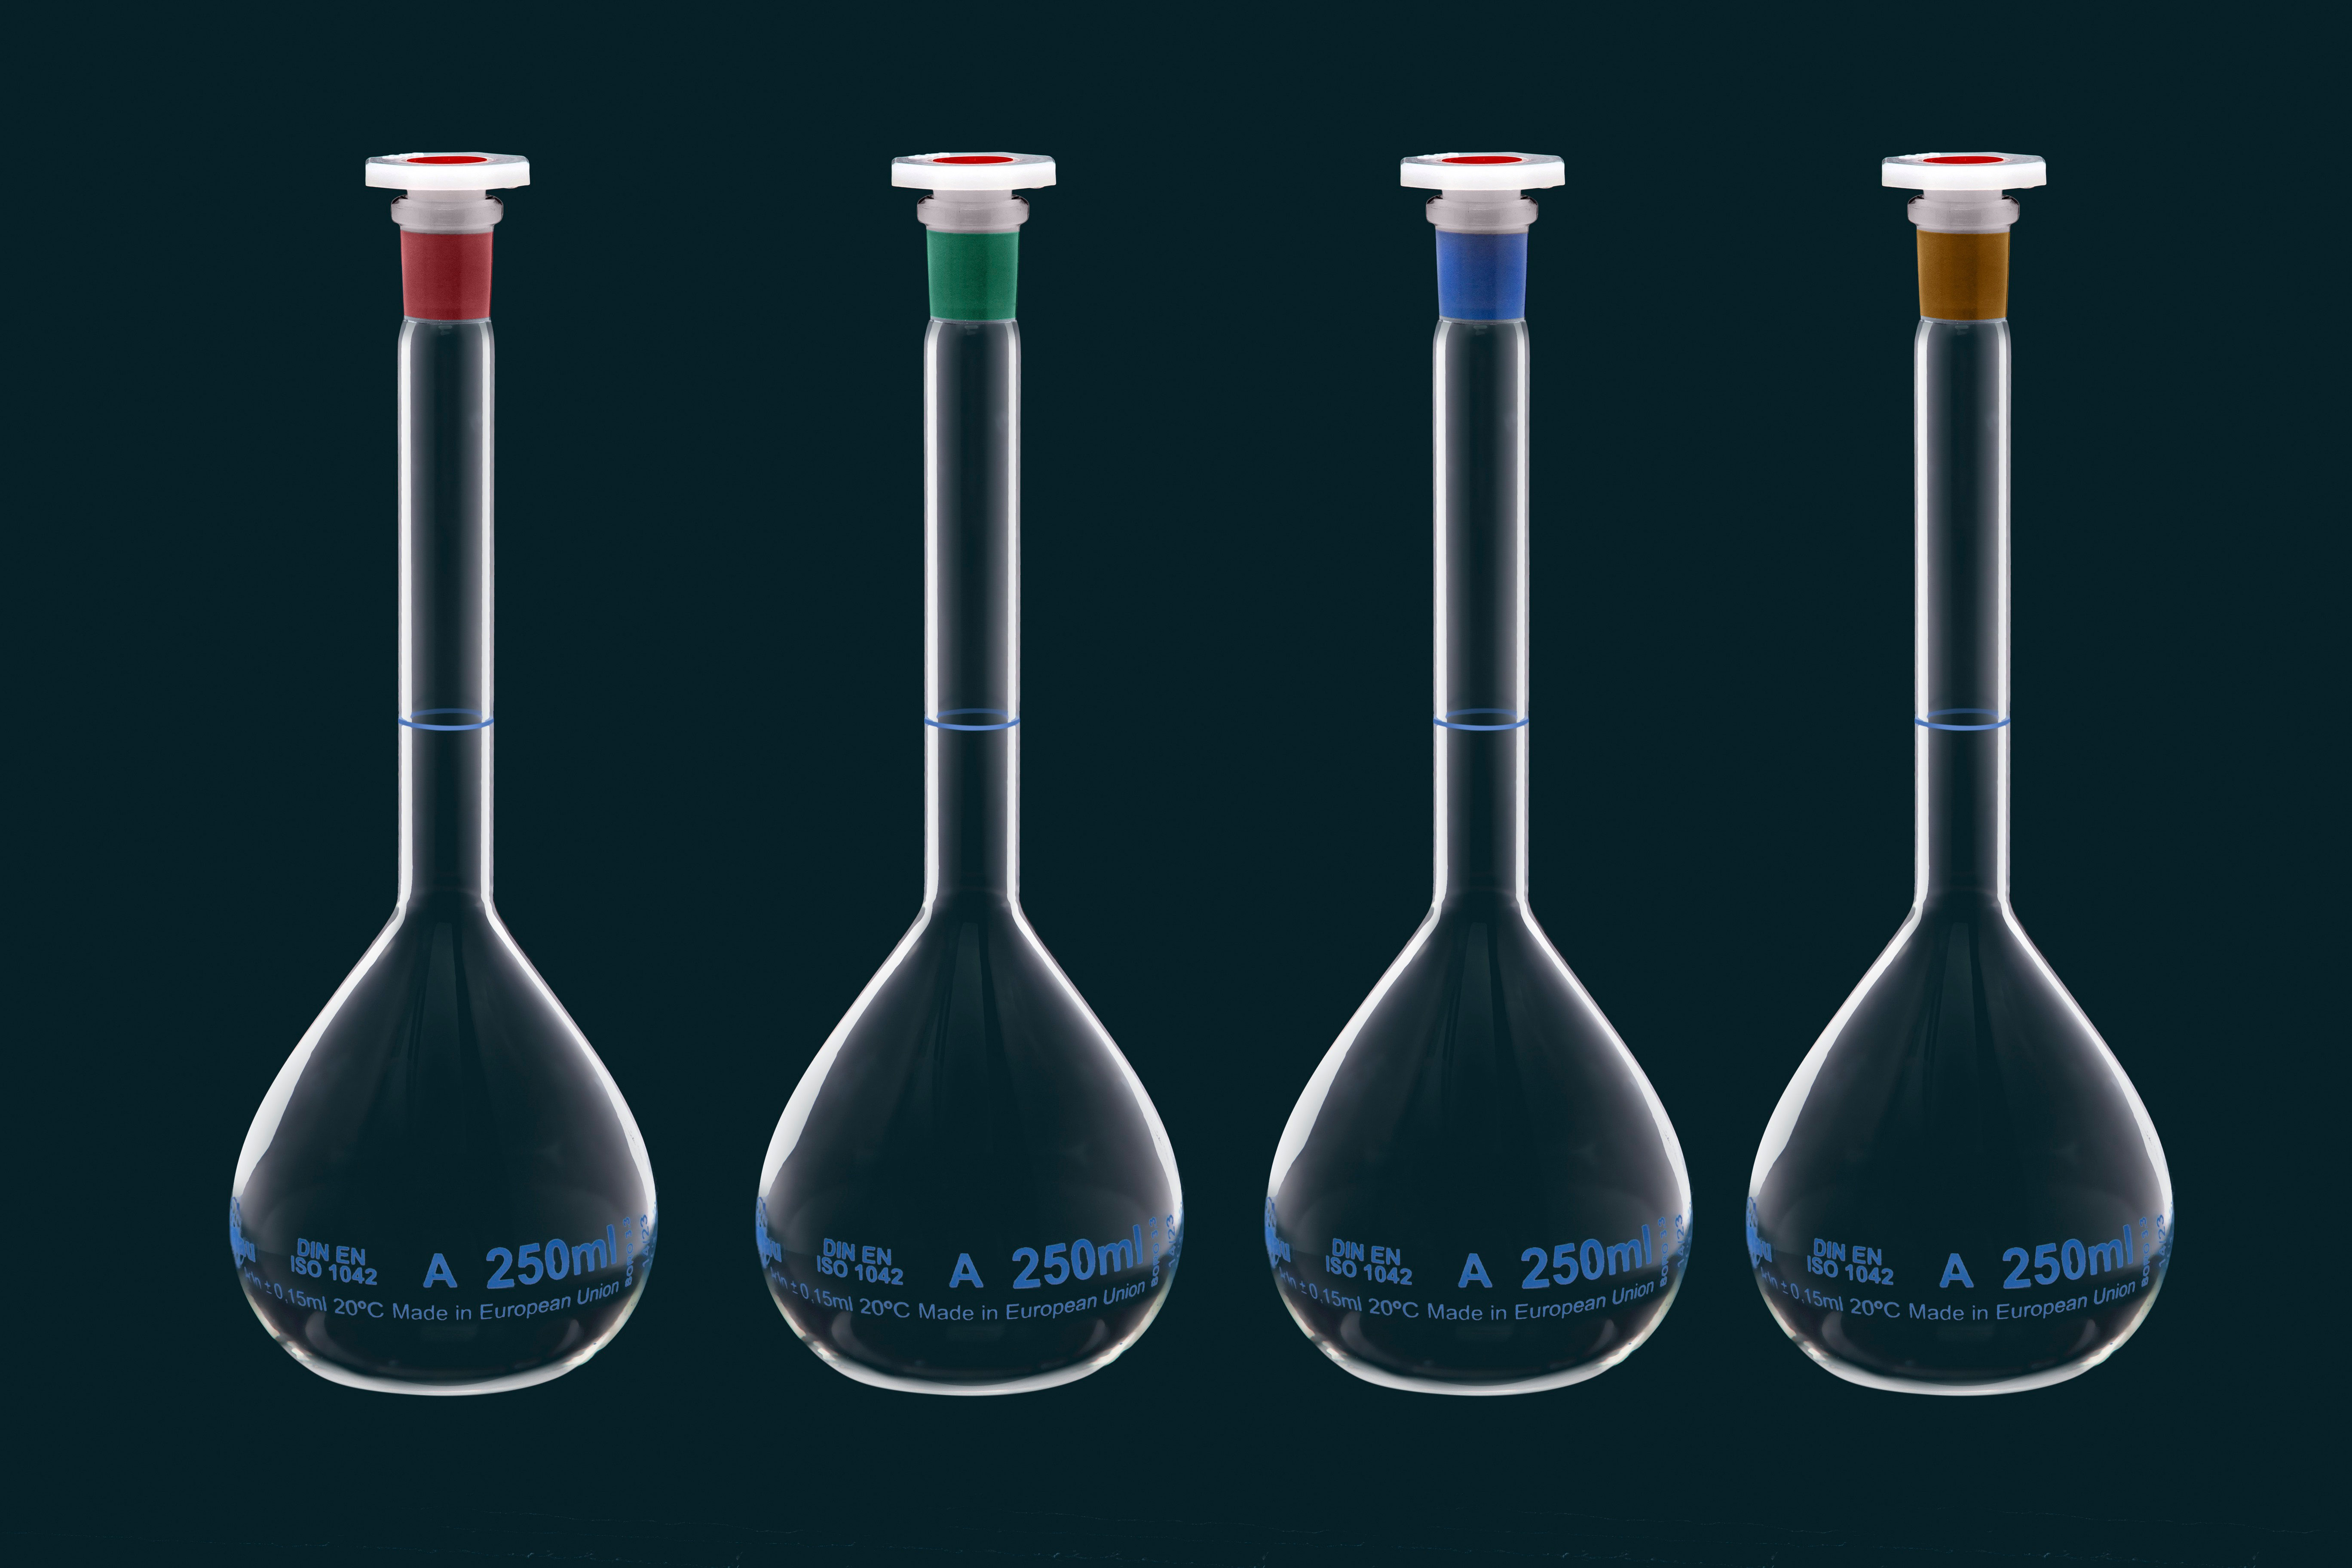 Volumetric flask with yellow neck, class A, 25ml, with PE stopper, lot number and certificate of conformity